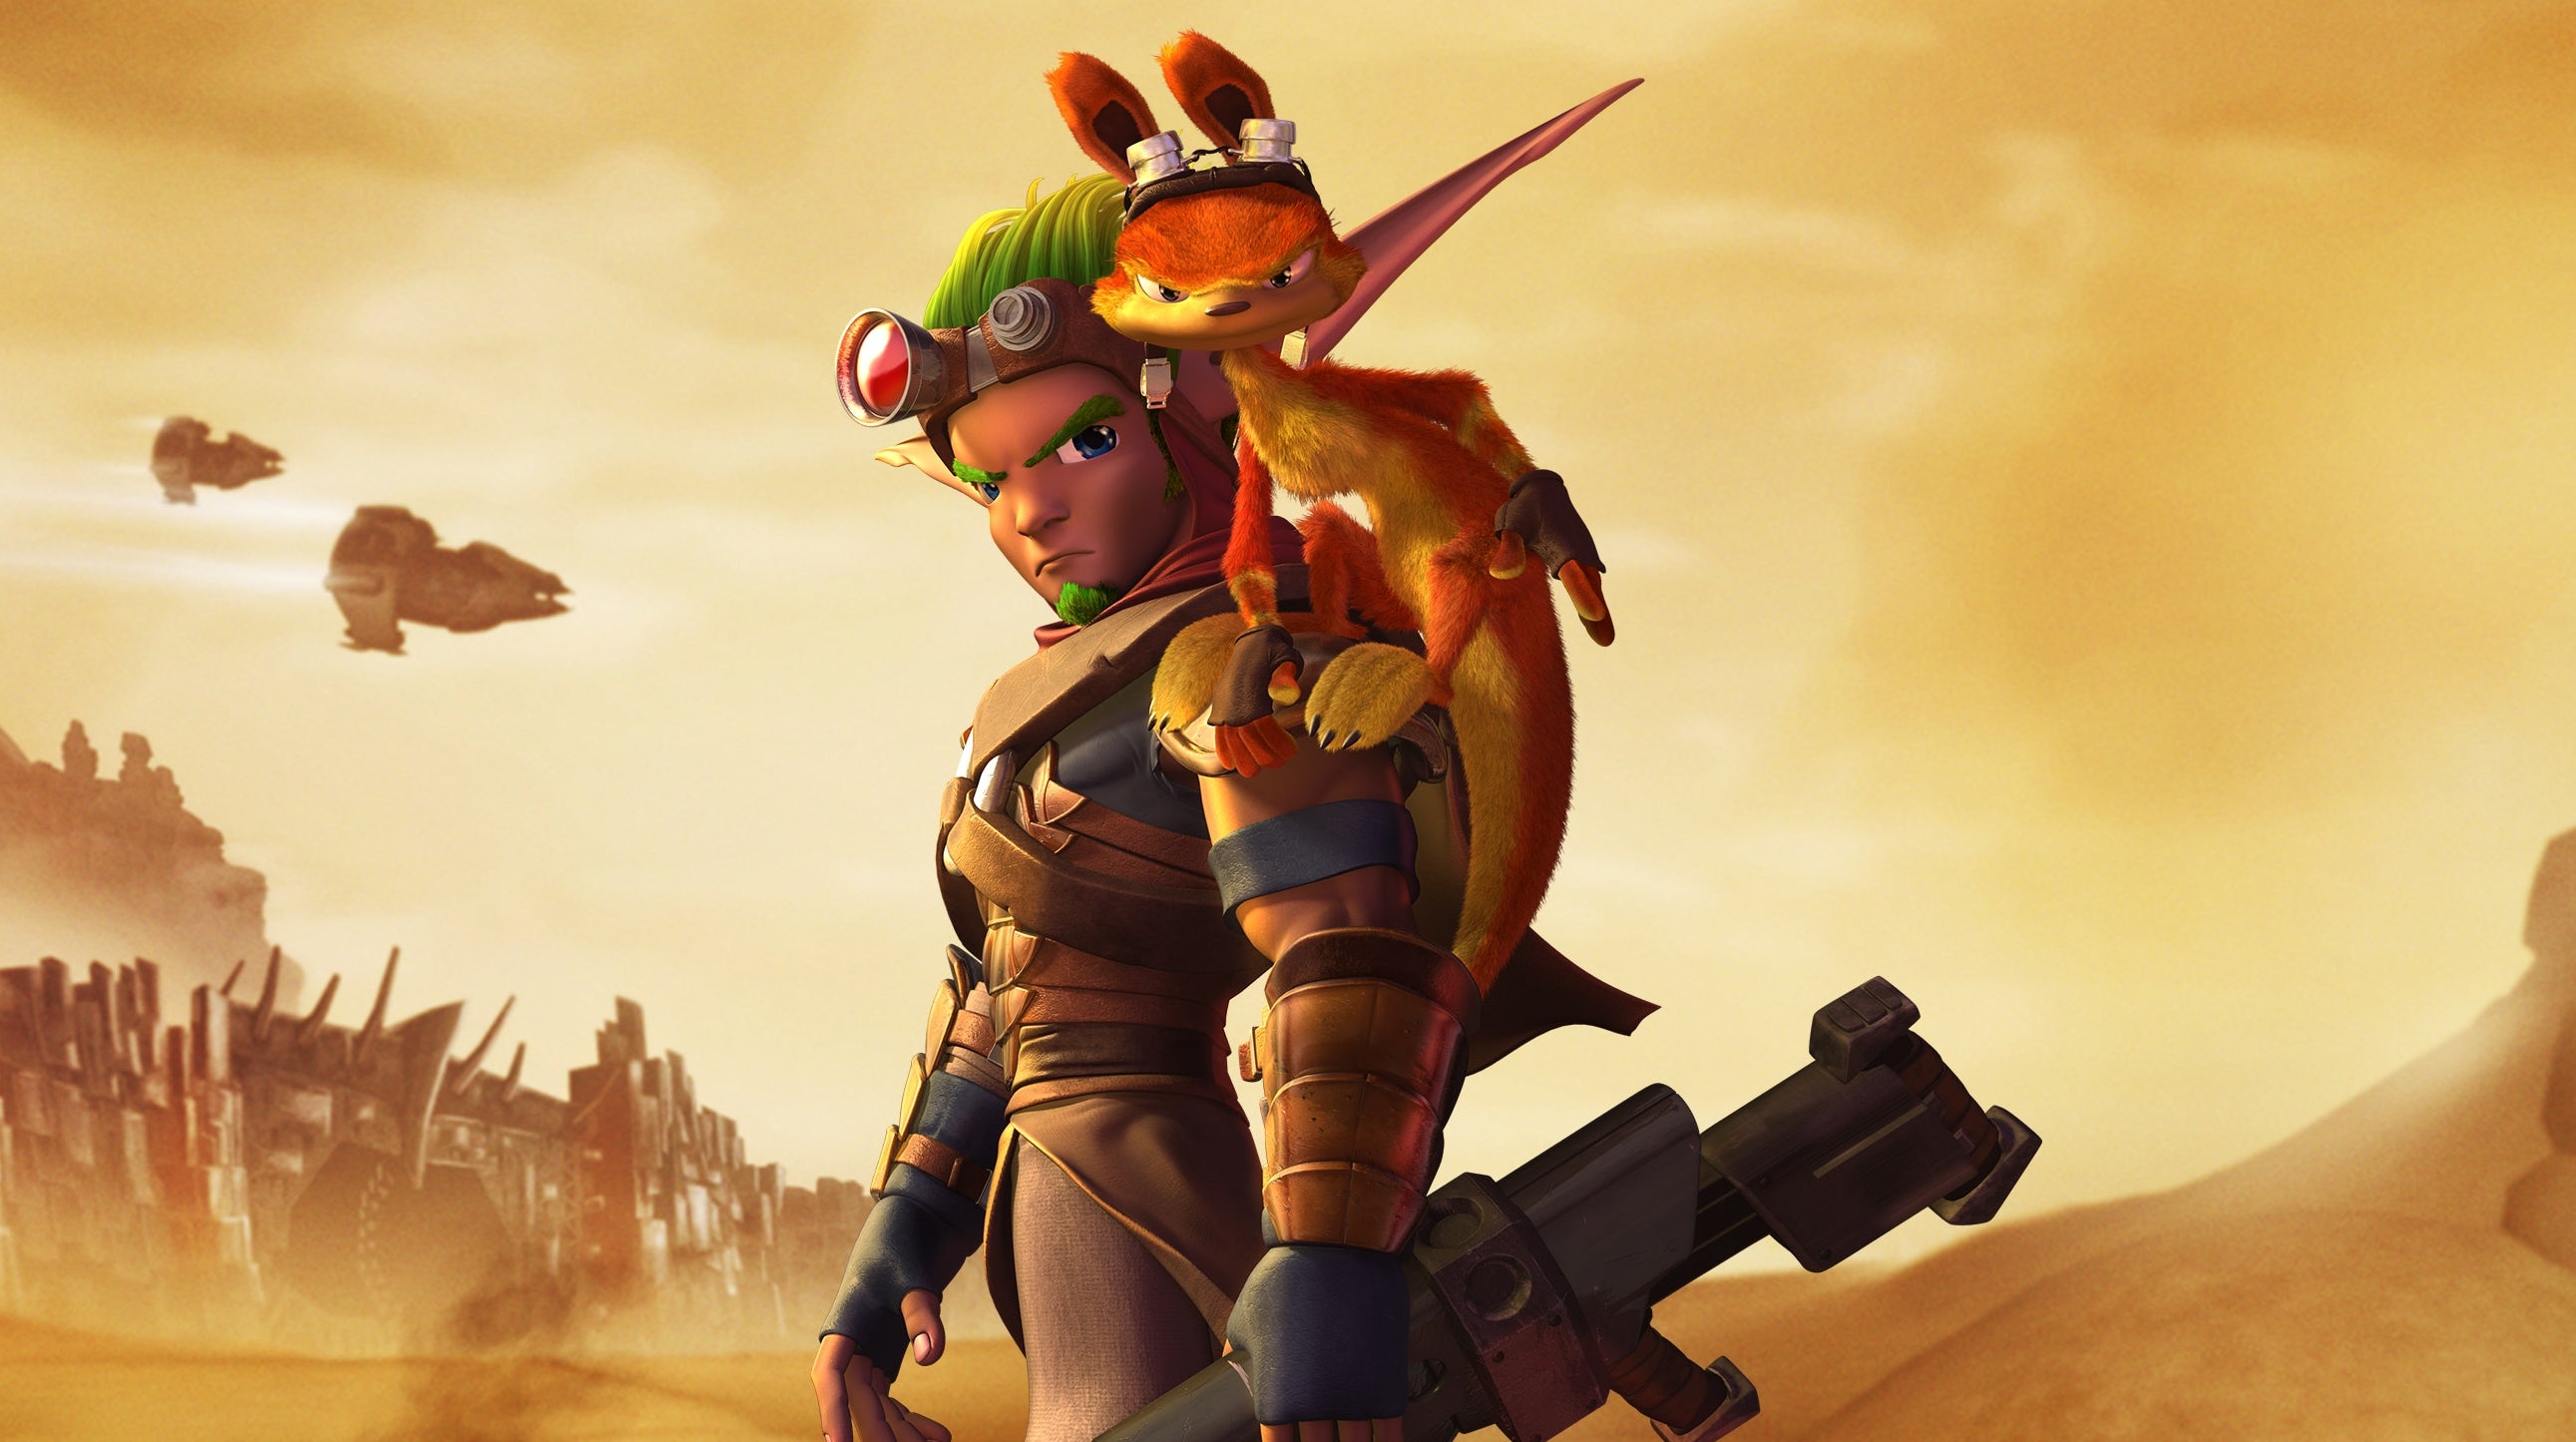 Image for Uncharted movie director reveals his next gig is a Jak and Daxter film